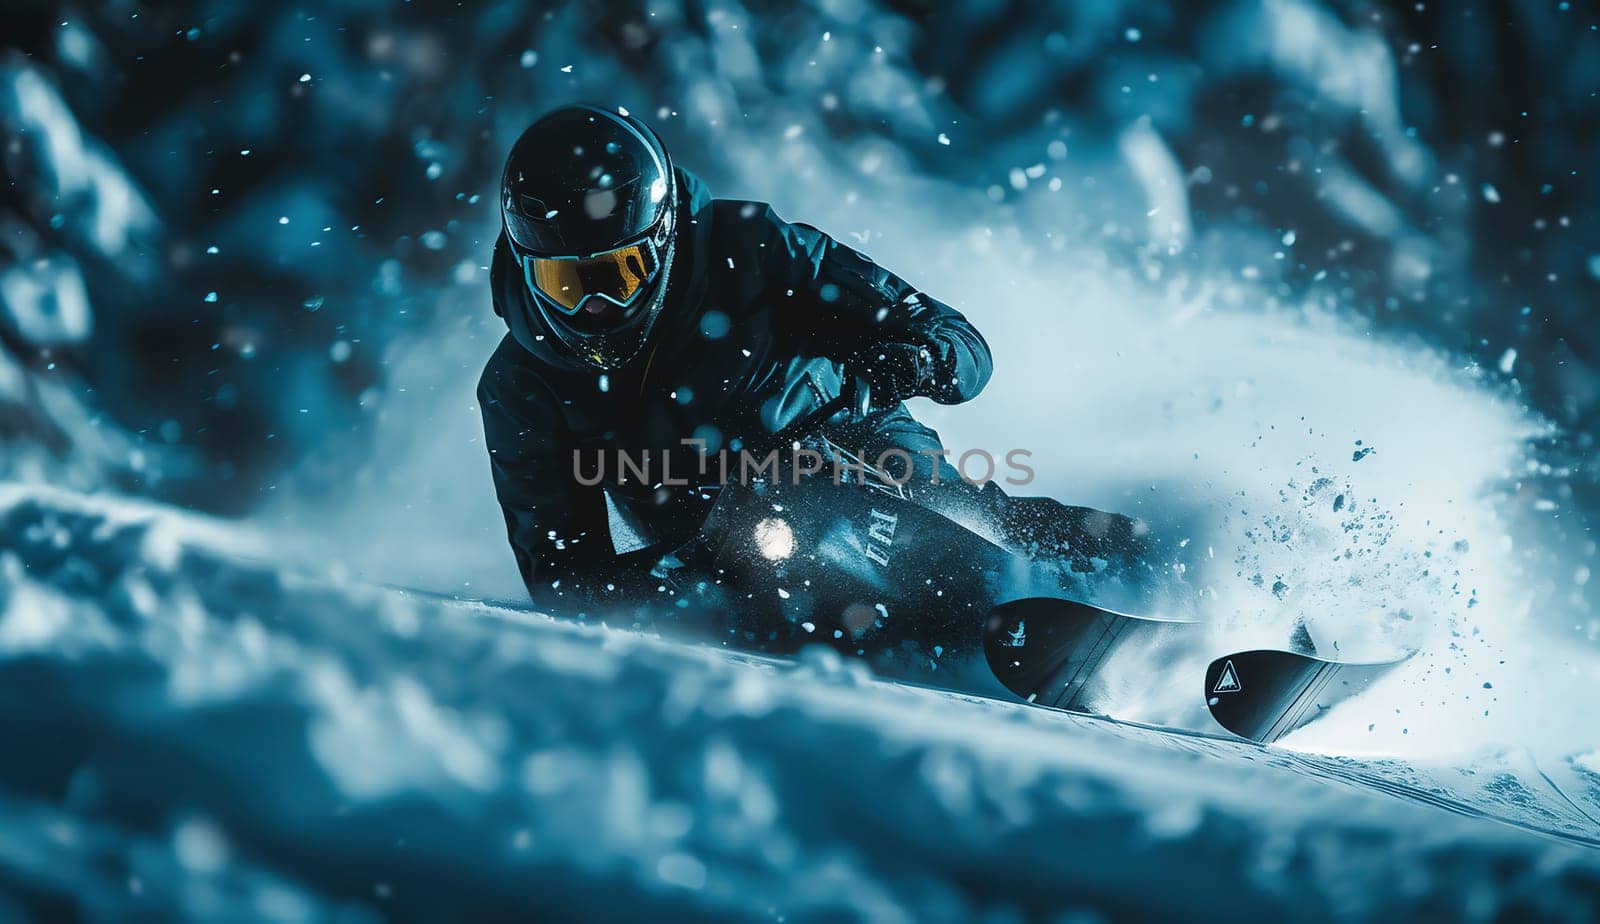 Colored hand sketch skier. illustration. High quality photo